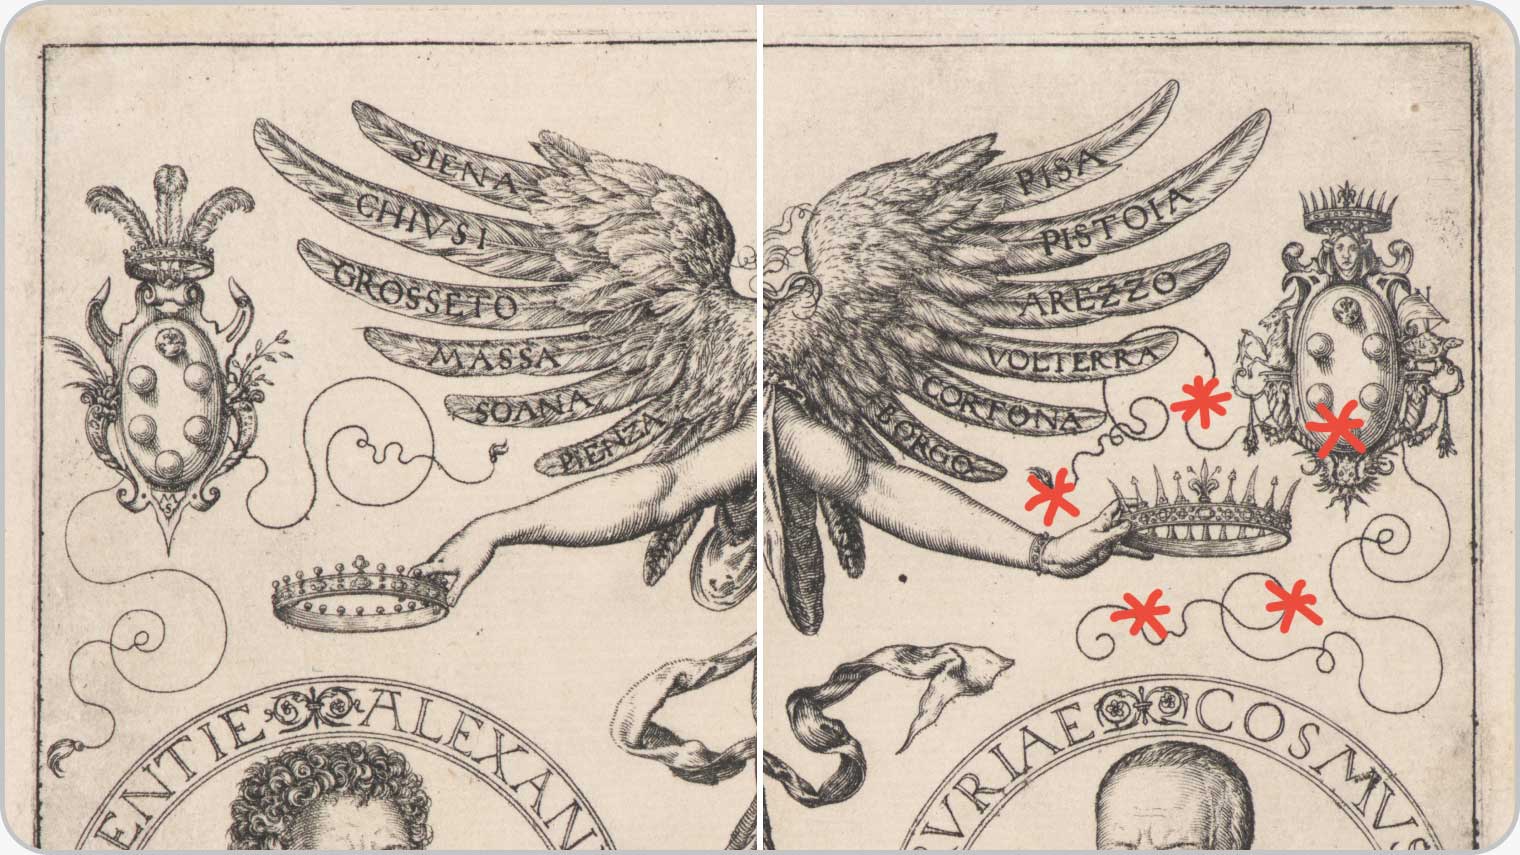 Detail of an engraving; red mark-ups that are not original to the artwork have been added digitally to point out the difference between the bedazzled crown on the right and the simpler crown on the left